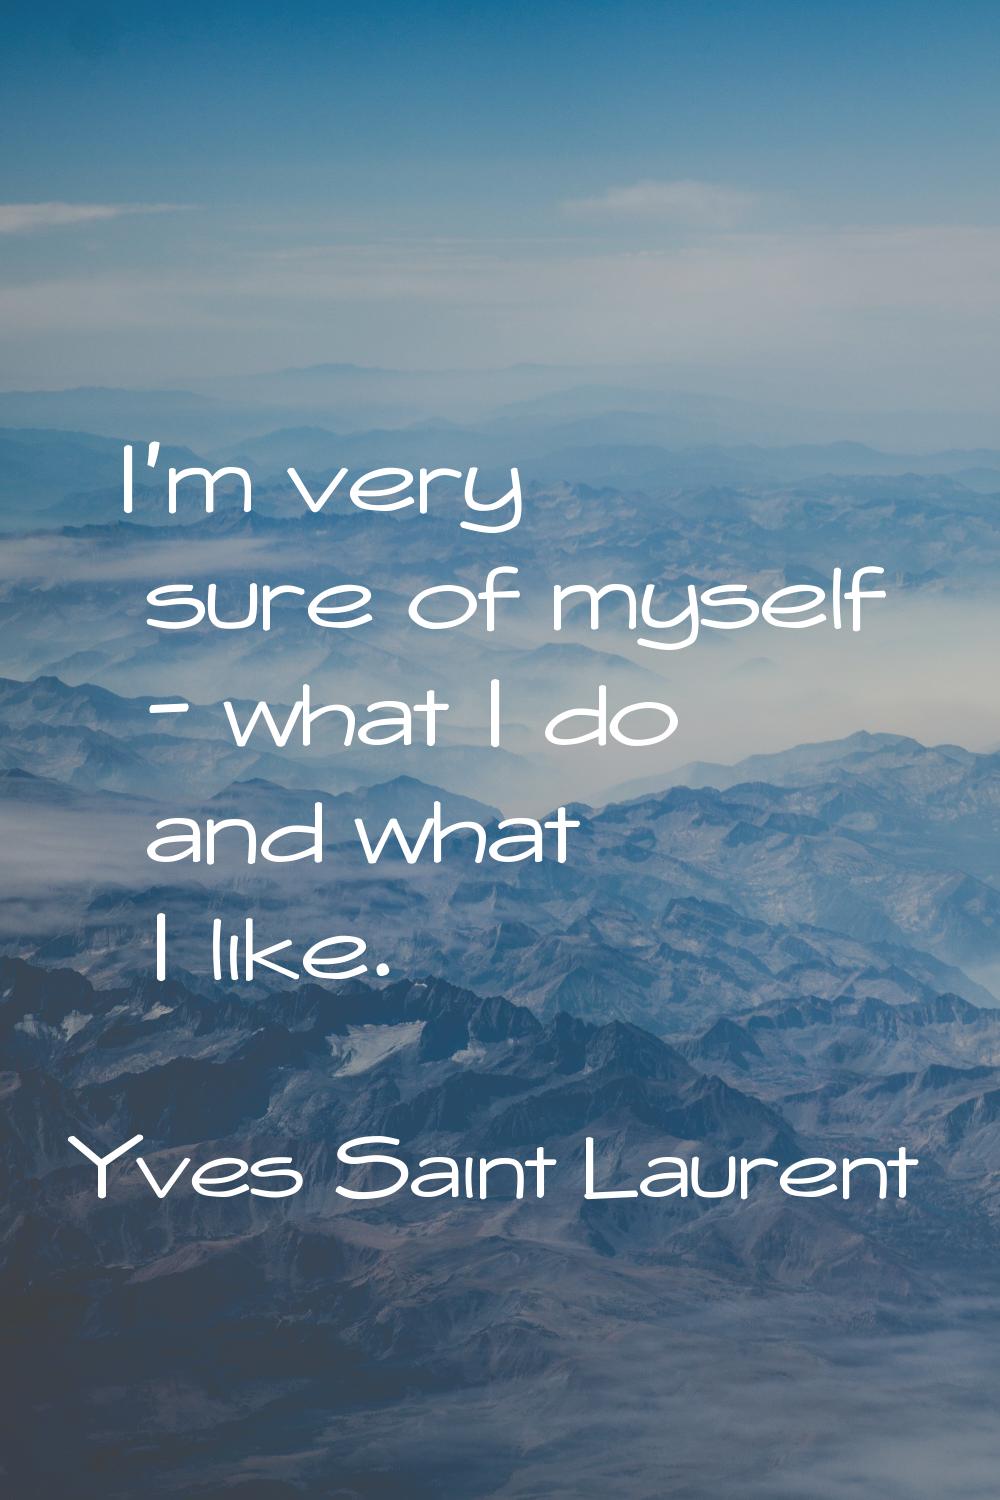 I'm very sure of myself - what I do and what I like.